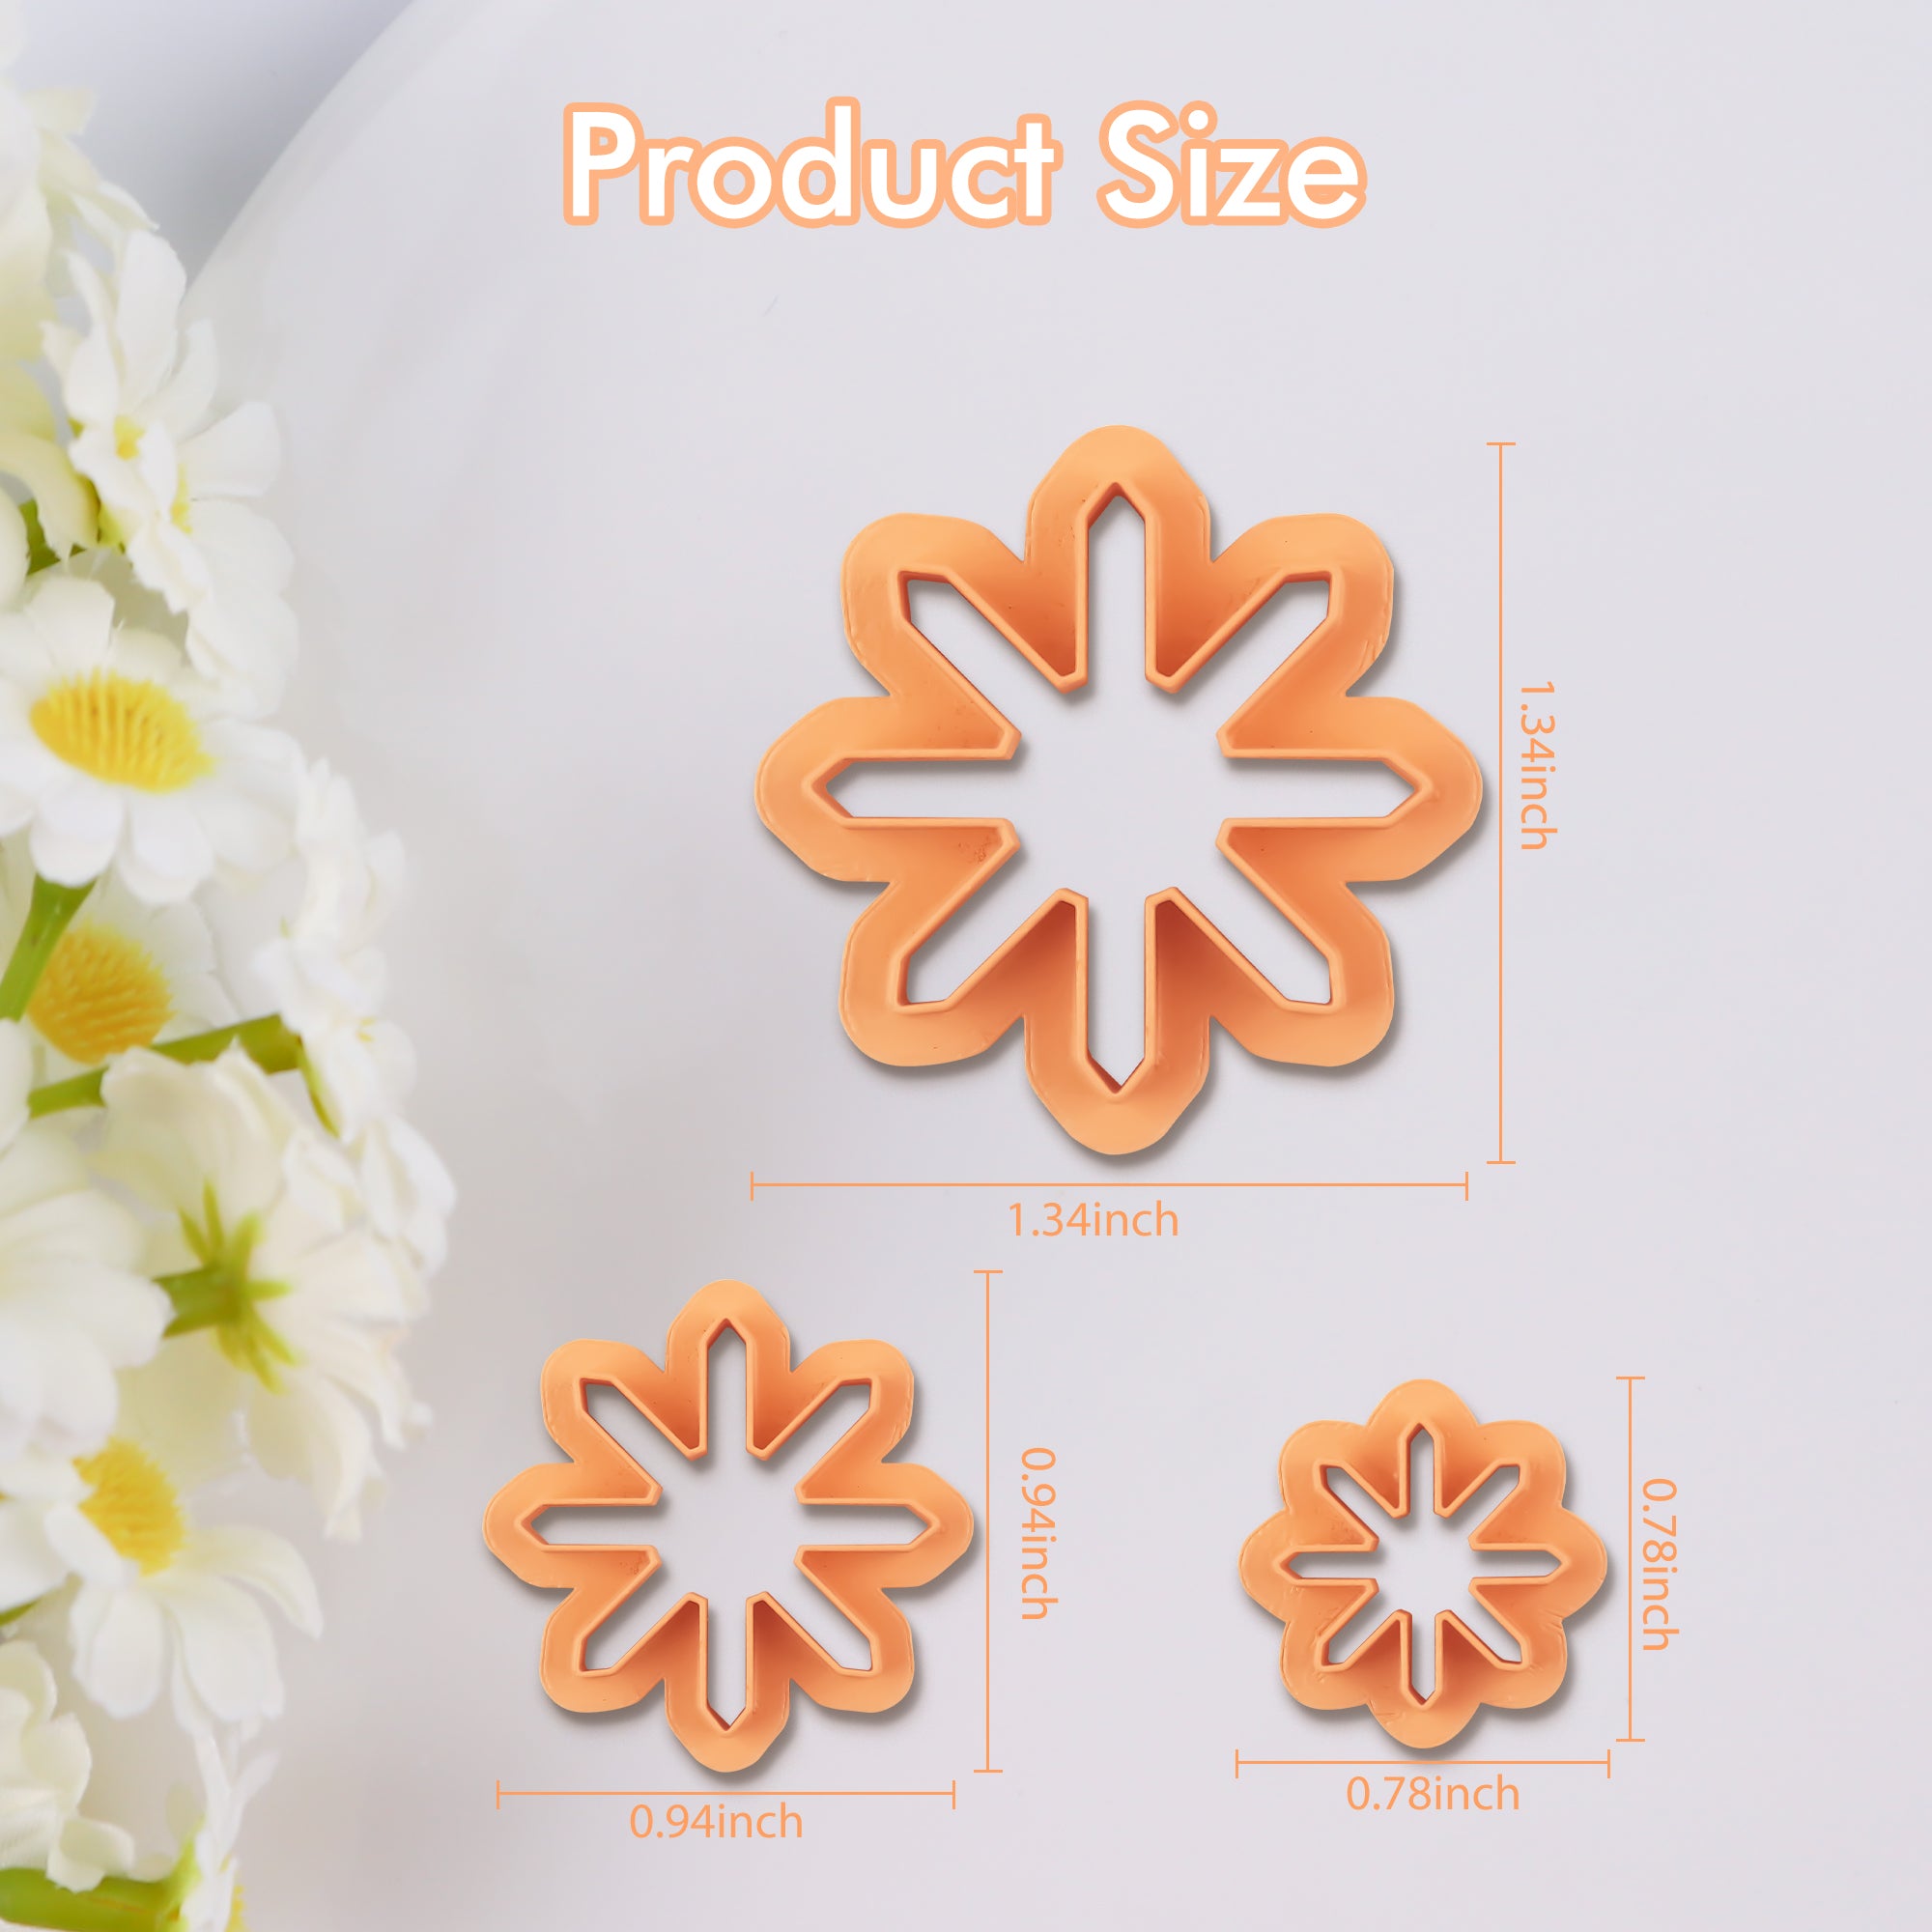 Puocaon Flower Polymer Clay Cutters Set- 3 Pcs Flower Clay Cutters, 2 Pcs Plumeria Flower Texture Molds, 20 Flower Pistil Brass Charms